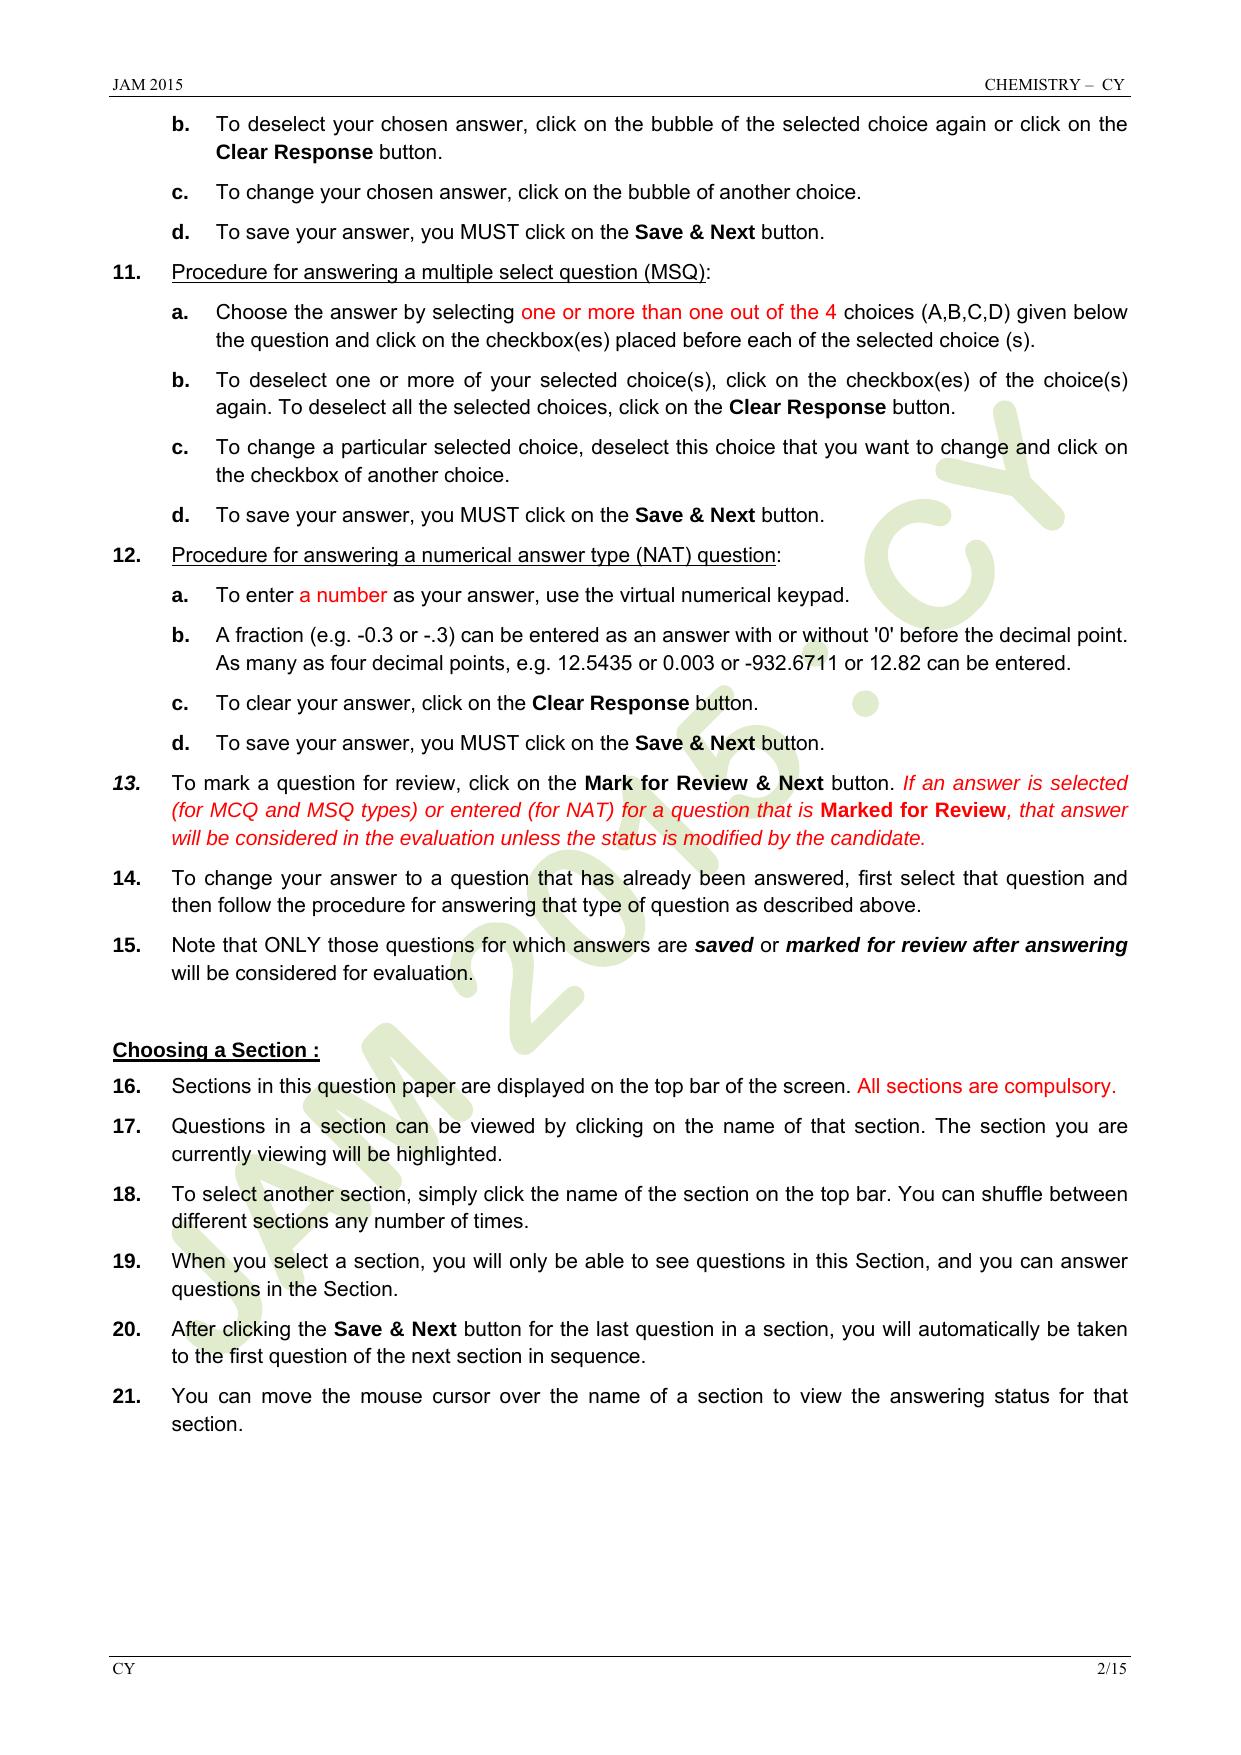 JAM 2015: CY Question Paper - Page 2